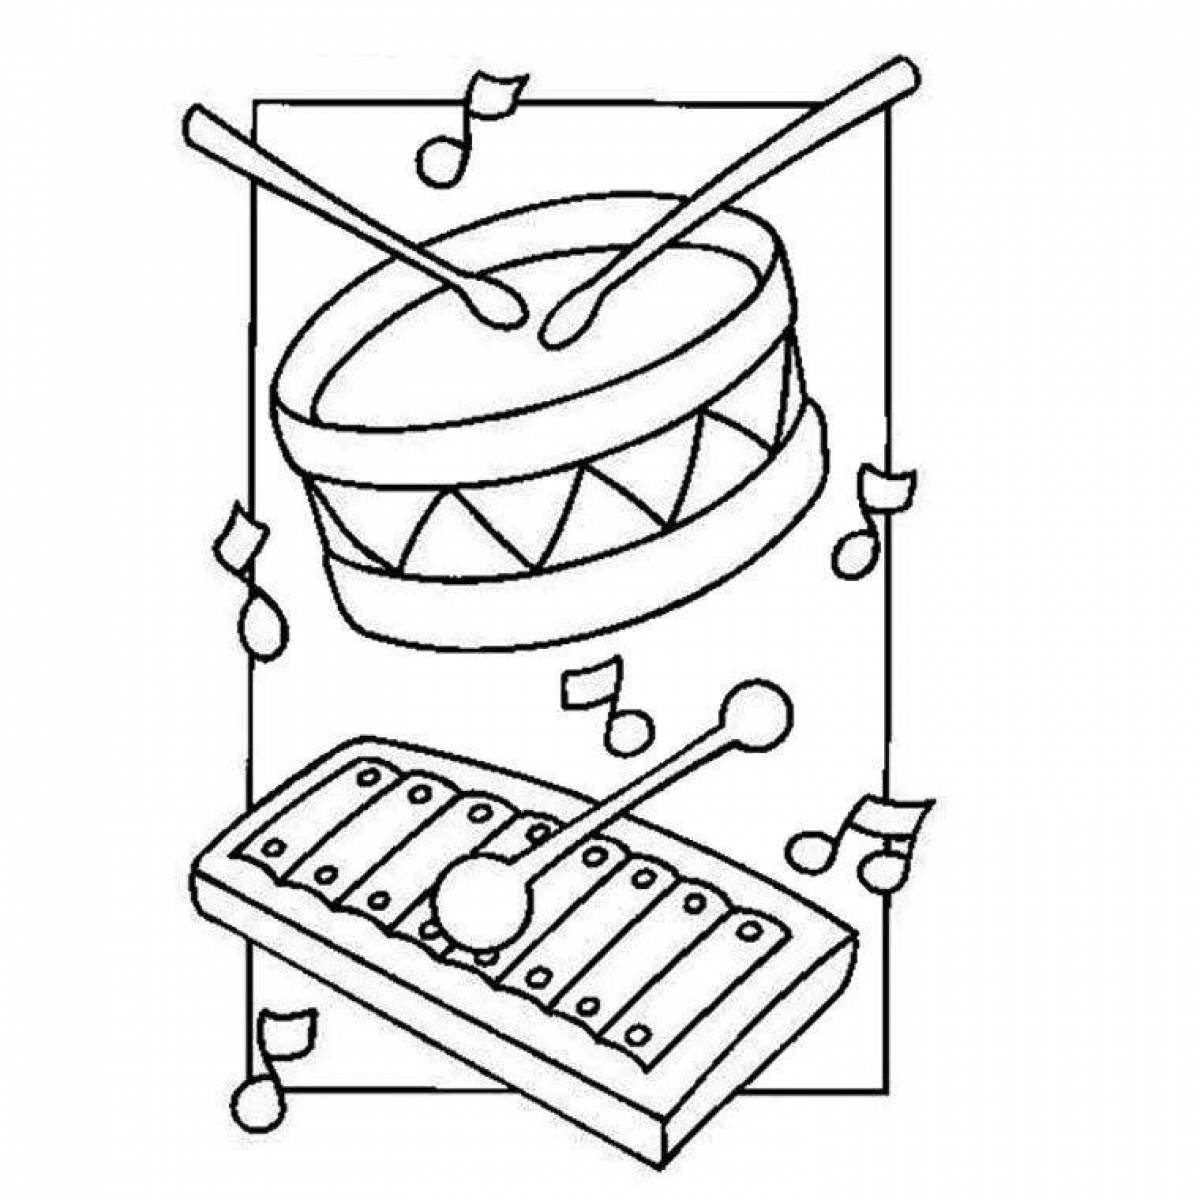 Fascinating musical instruments coloring 1st grade